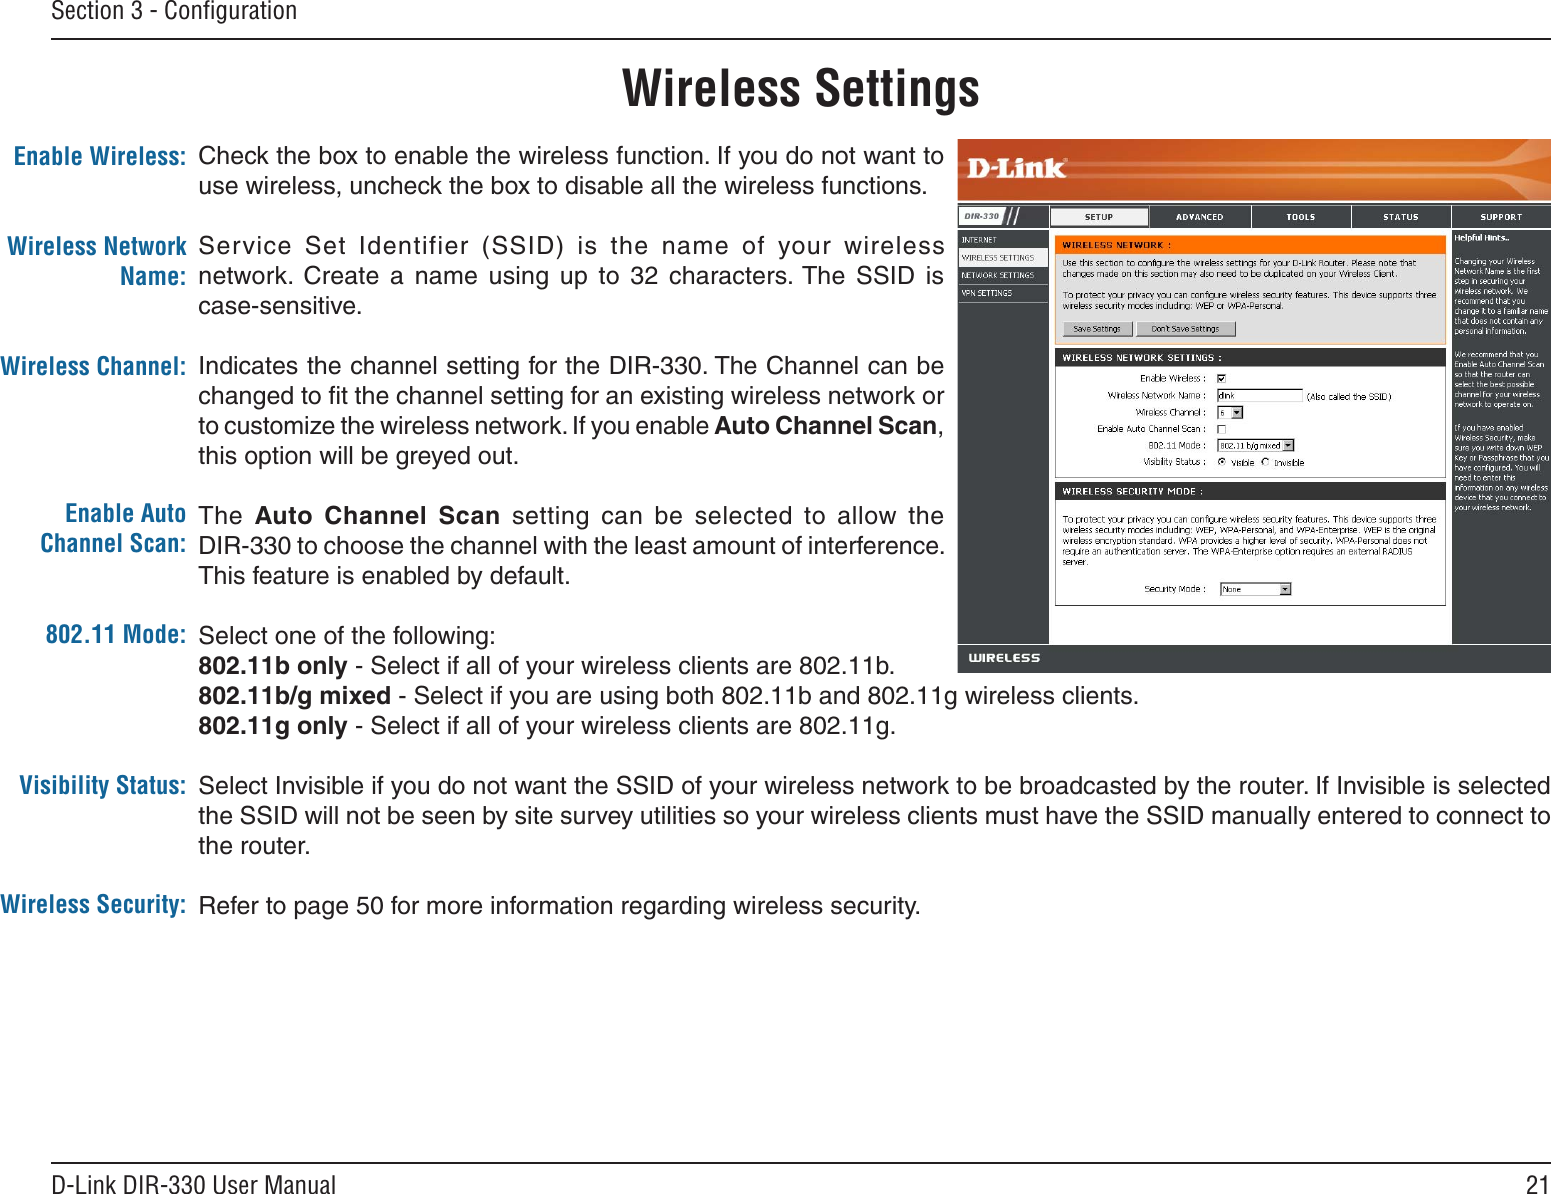 21D-Link DIR-330 User ManualSection 3 - ConﬁgurationCheck the box to enable the wireless function. If you do not want to use wireless, uncheck the box to disable all the wireless functions.Service  Set  Identifier  (SSID)  is  the  name  of  your  wireless network.  Create  a  name  using  up  to  32  characters. The  SSID  is  case-sensitive.Indicates the channel setting for the DIR-330. The Channel can be changed to ﬁt the channel setting for an existing wireless network or to customize the wireless network. If you enable Auto Channel Scan, this option will be greyed out.The  Auto  Channel  Scan  setting  can  be  selected  to  allow  the  DIR-330 to choose the channel with the least amount of interference. This feature is enabled by default.Select one of the following:802.11b only - Select if all of your wireless clients are 802.11b.802.11b/g mixed - Select if you are using both 802.11b and 802.11g wireless clients.802.11g only - Select if all of your wireless clients are 802.11g.Select Invisible if you do not want the SSID of your wireless network to be broadcasted by the router. If Invisible is selected the SSID will not be seen by site survey utilities so your wireless clients must have the SSID manually entered to connect to the router.Refer to page 50 for more information regarding wireless security.Enable Wireless:Enable Auto Channel Scan:Wireless SettingsWireless Network Name:Wireless Channel:802.11 Mode:Visibility Status:Wireless Security: